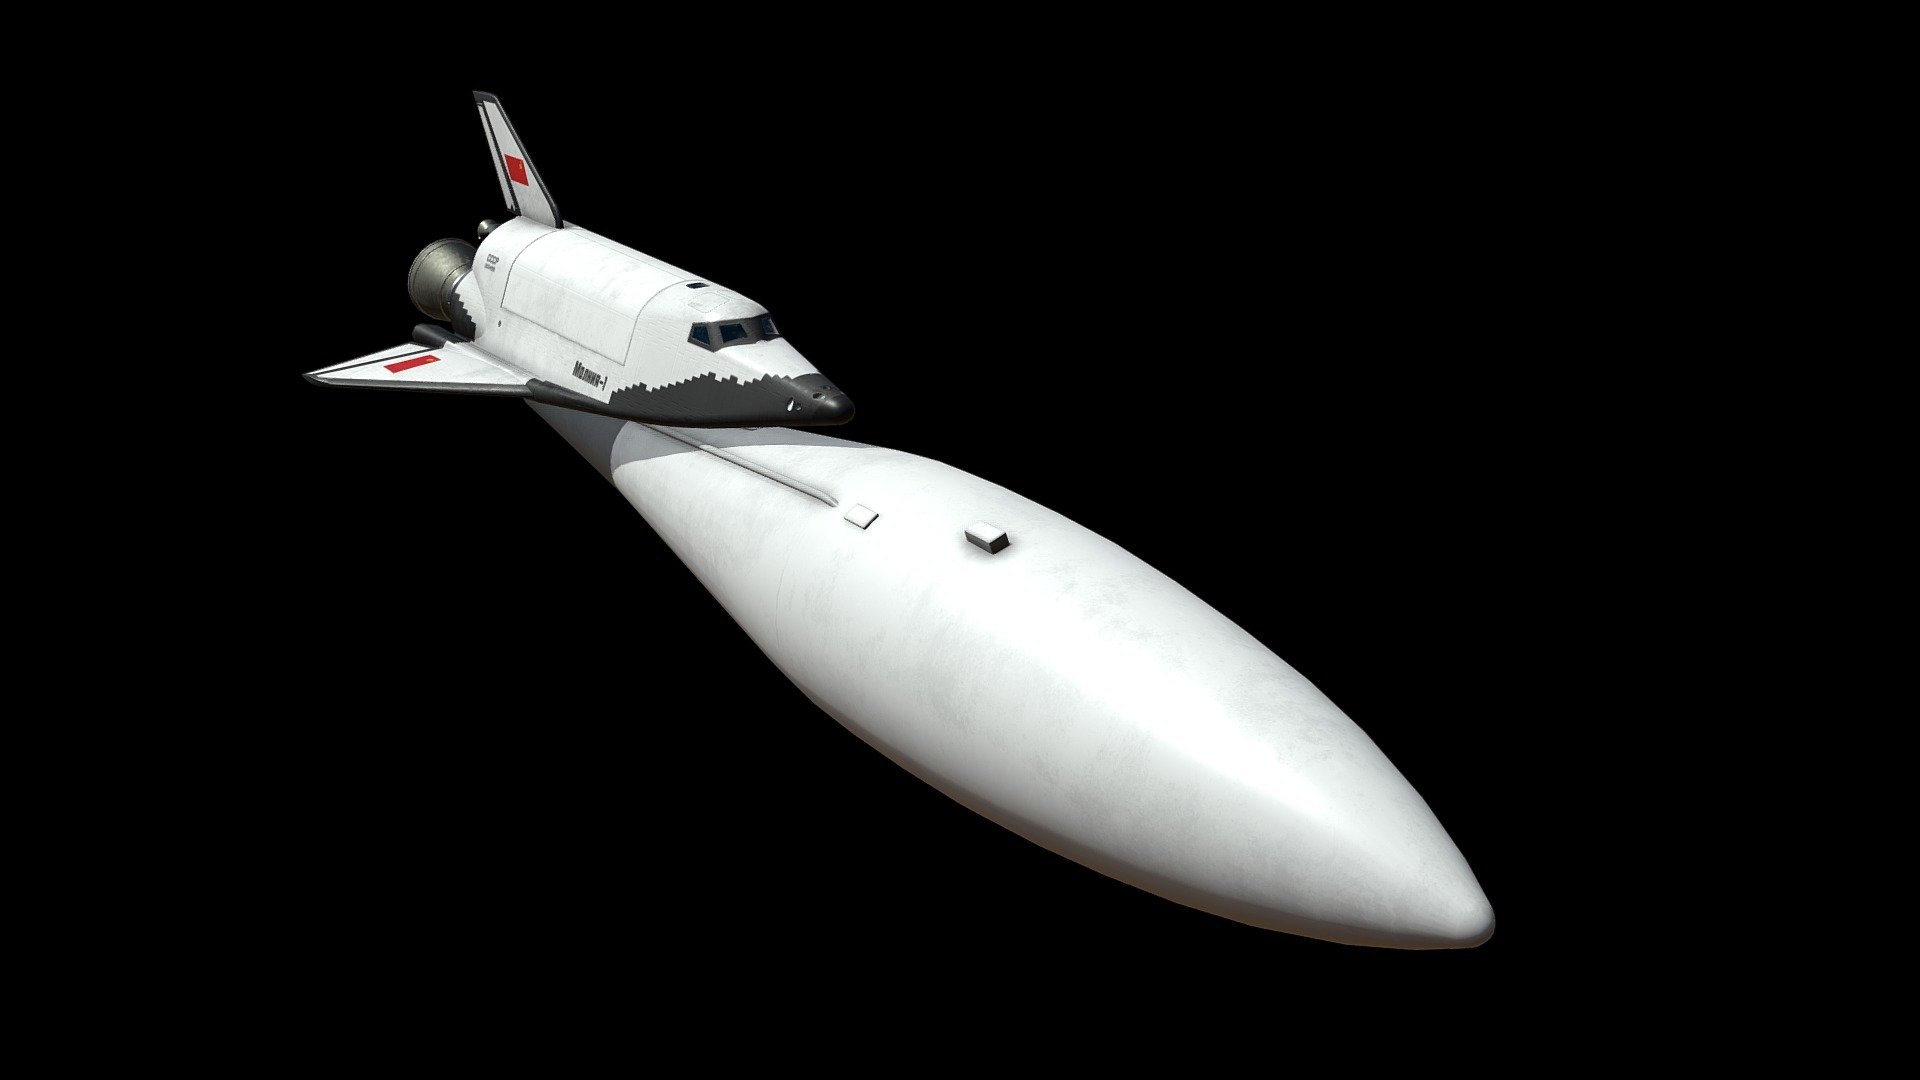 The MAKS (Multipurpose aerospace system)  is a Soviet air-launched orbiter reusable launch system project that was proposed in 1988, but cancelled in 1991. The orbiter was supposed to reduce the cost of transporting materials to Earth orbit by a factor of ten. The reusable orbiter and its external expendable fuel tank would have been launched by an Antonov AN-225 airplane, developed by Antonov ASTC (Kyiv, Ukraine). Had it been built, the system would have weighed 275 metric tons (271 long tons; 303 short tons) and been capable of carrying a 7-metric-ton (6.9-long-ton; 7.7-short-ton) payload.[1]

Three variants of the MAKS system were conceived: MAKS-OS, the standard configuration; MAKS-T, with upgraded payload capability; and MAKS-M, a version that included its fuel tank within the envelope of the orbiter 3d model